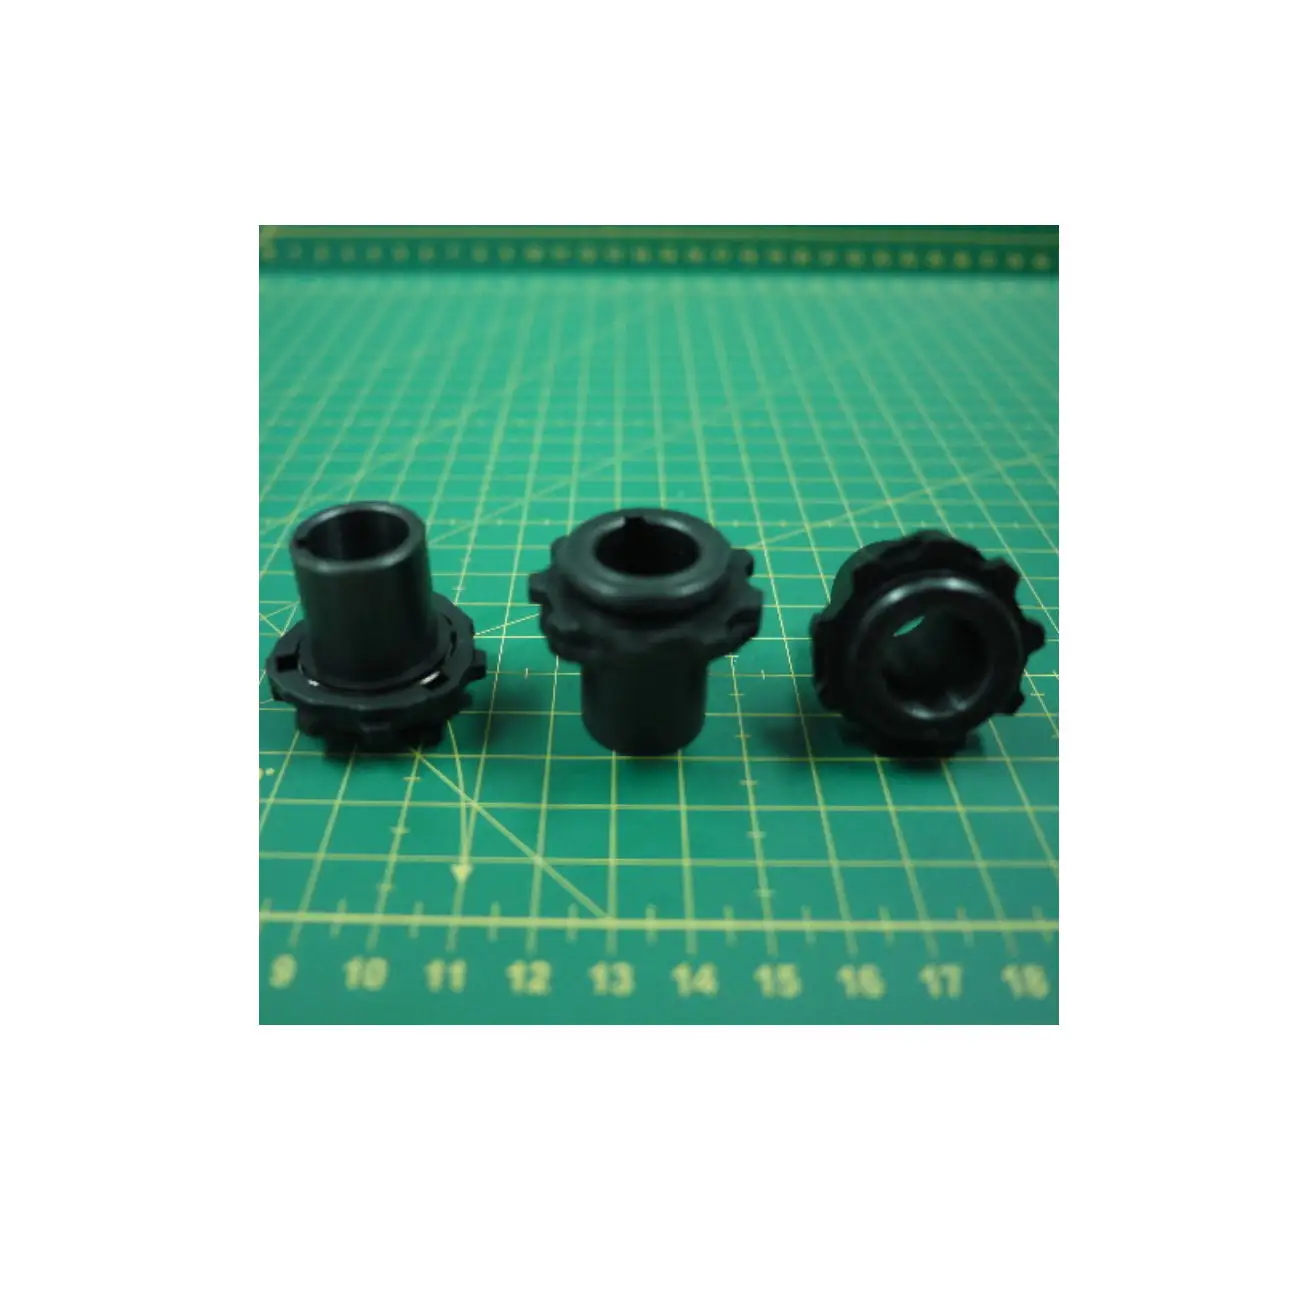 4111595-01 CAM STACK GEAR HOUSEHOLD SEWING MACHINE CAM STACK GEAR FOR VIKING